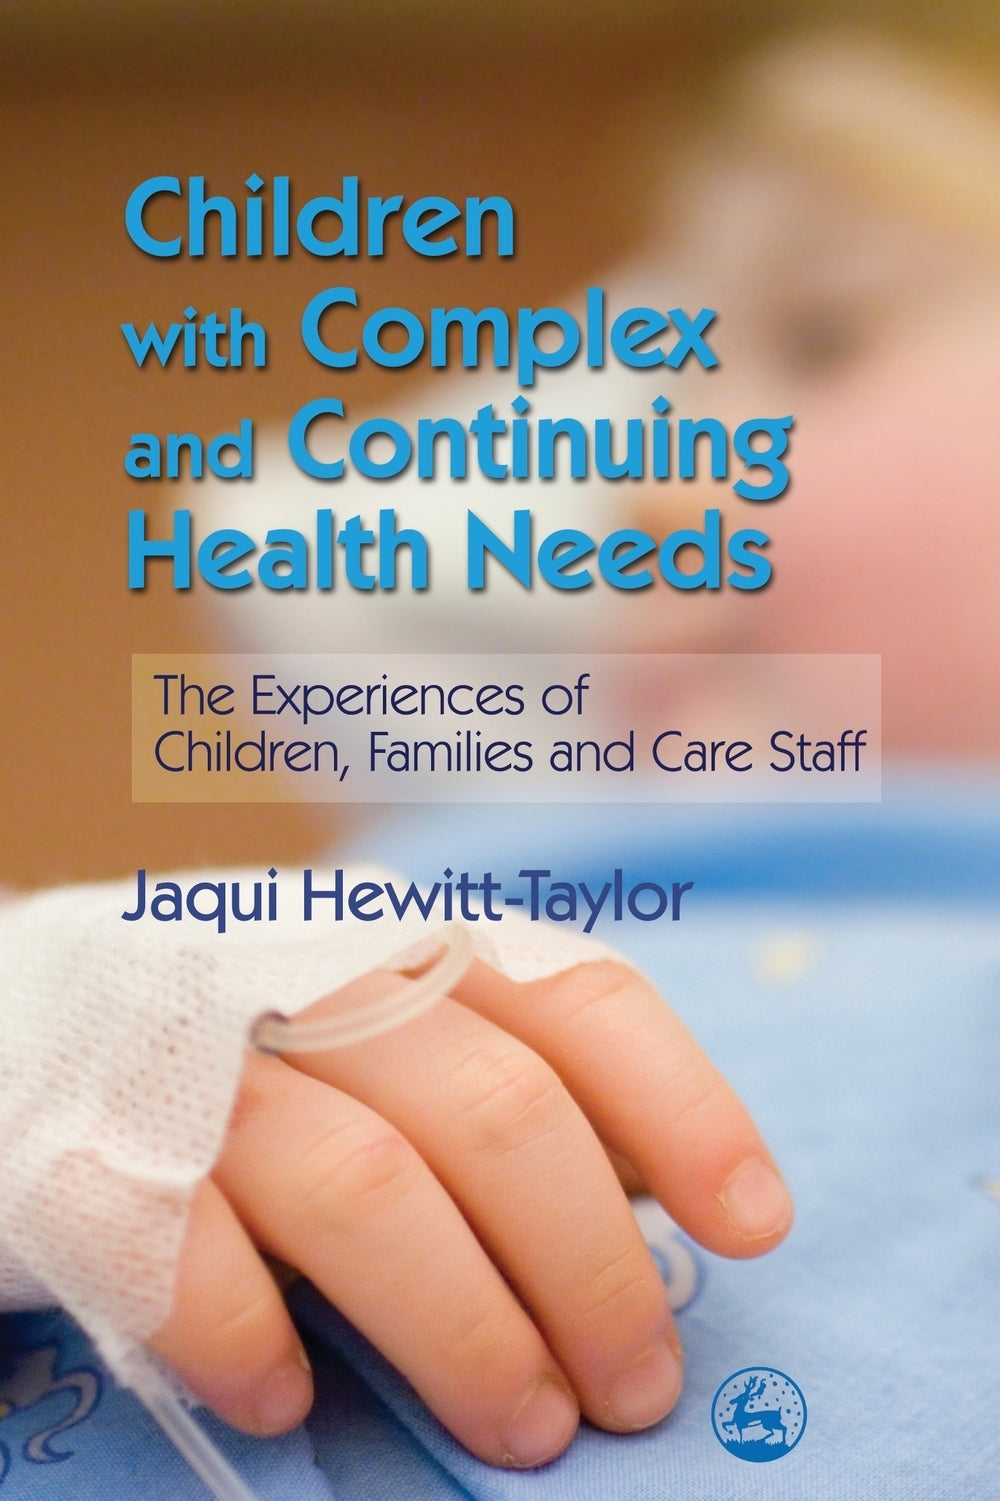 Children with Complex and Continuing Health Needs by Jaqui Hewitt-Taylor